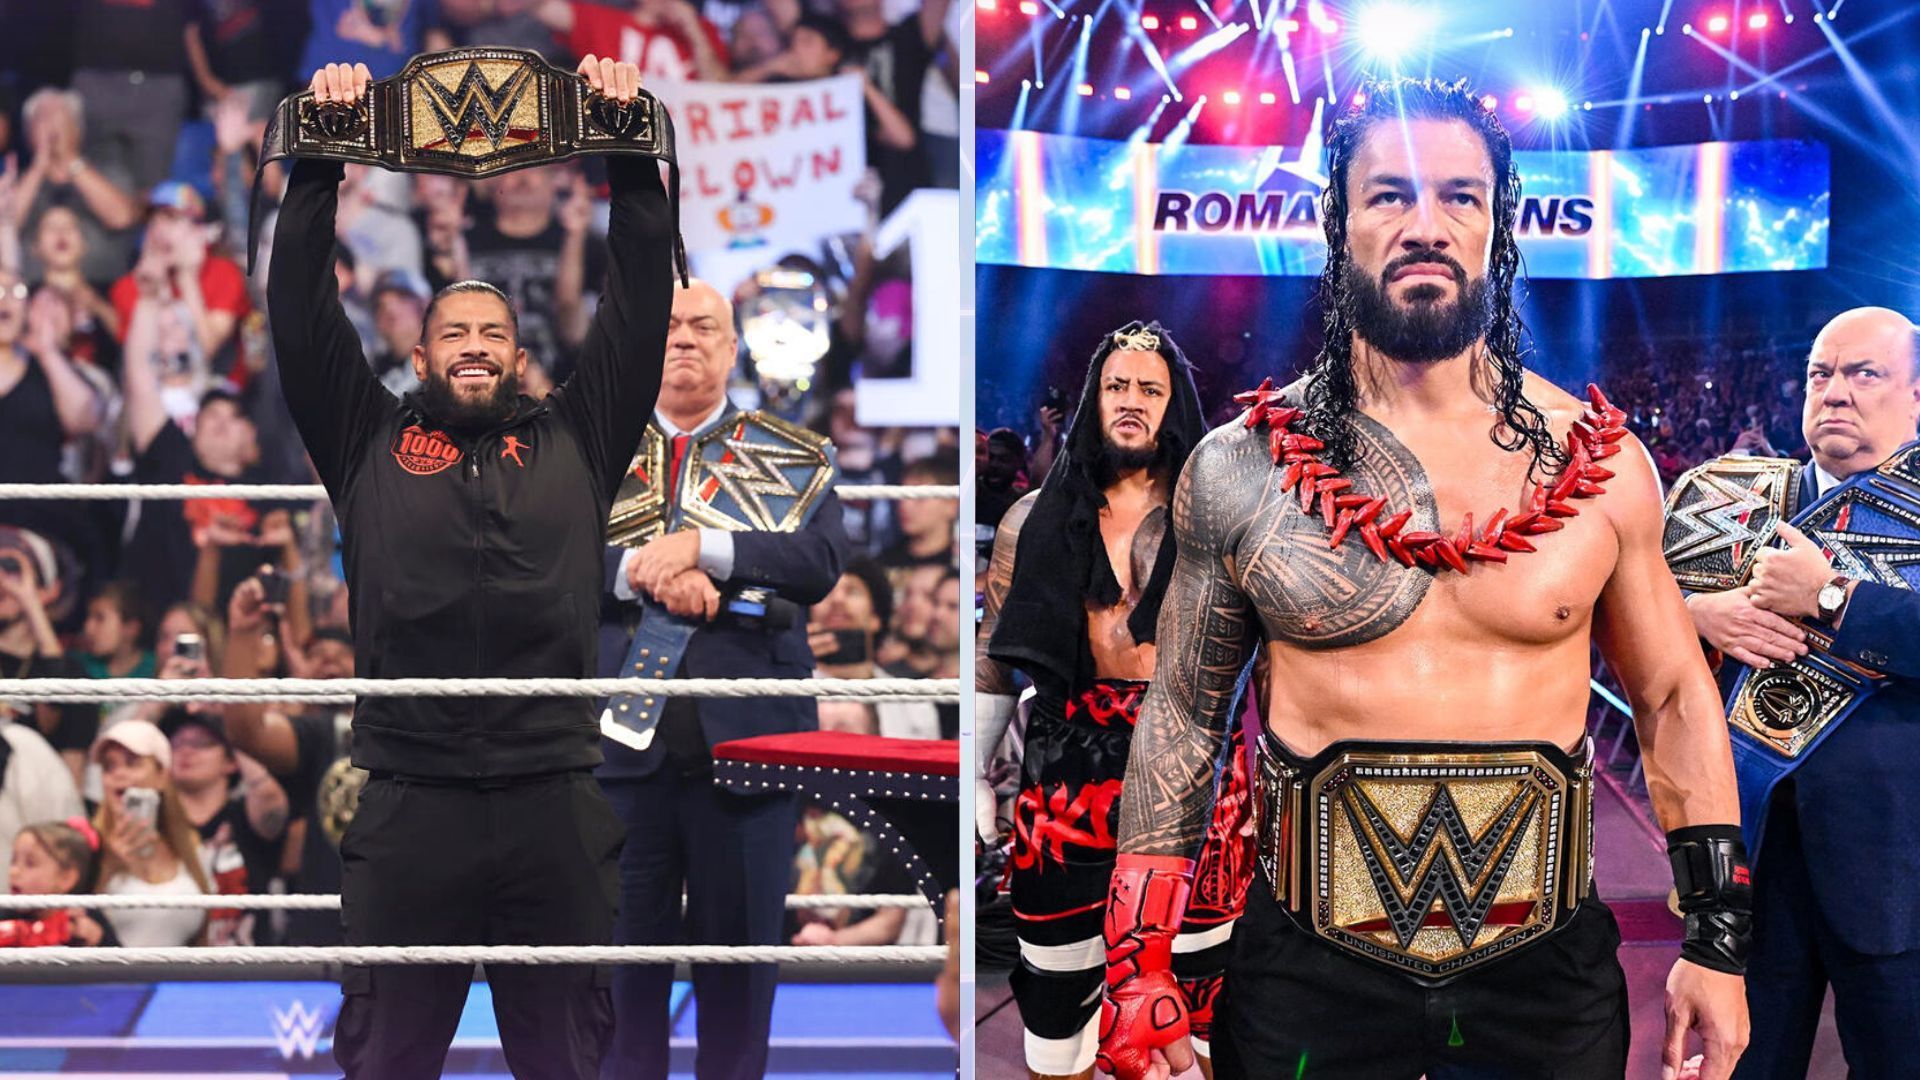 Roman Reigns will defend his title in a blockbuster match.